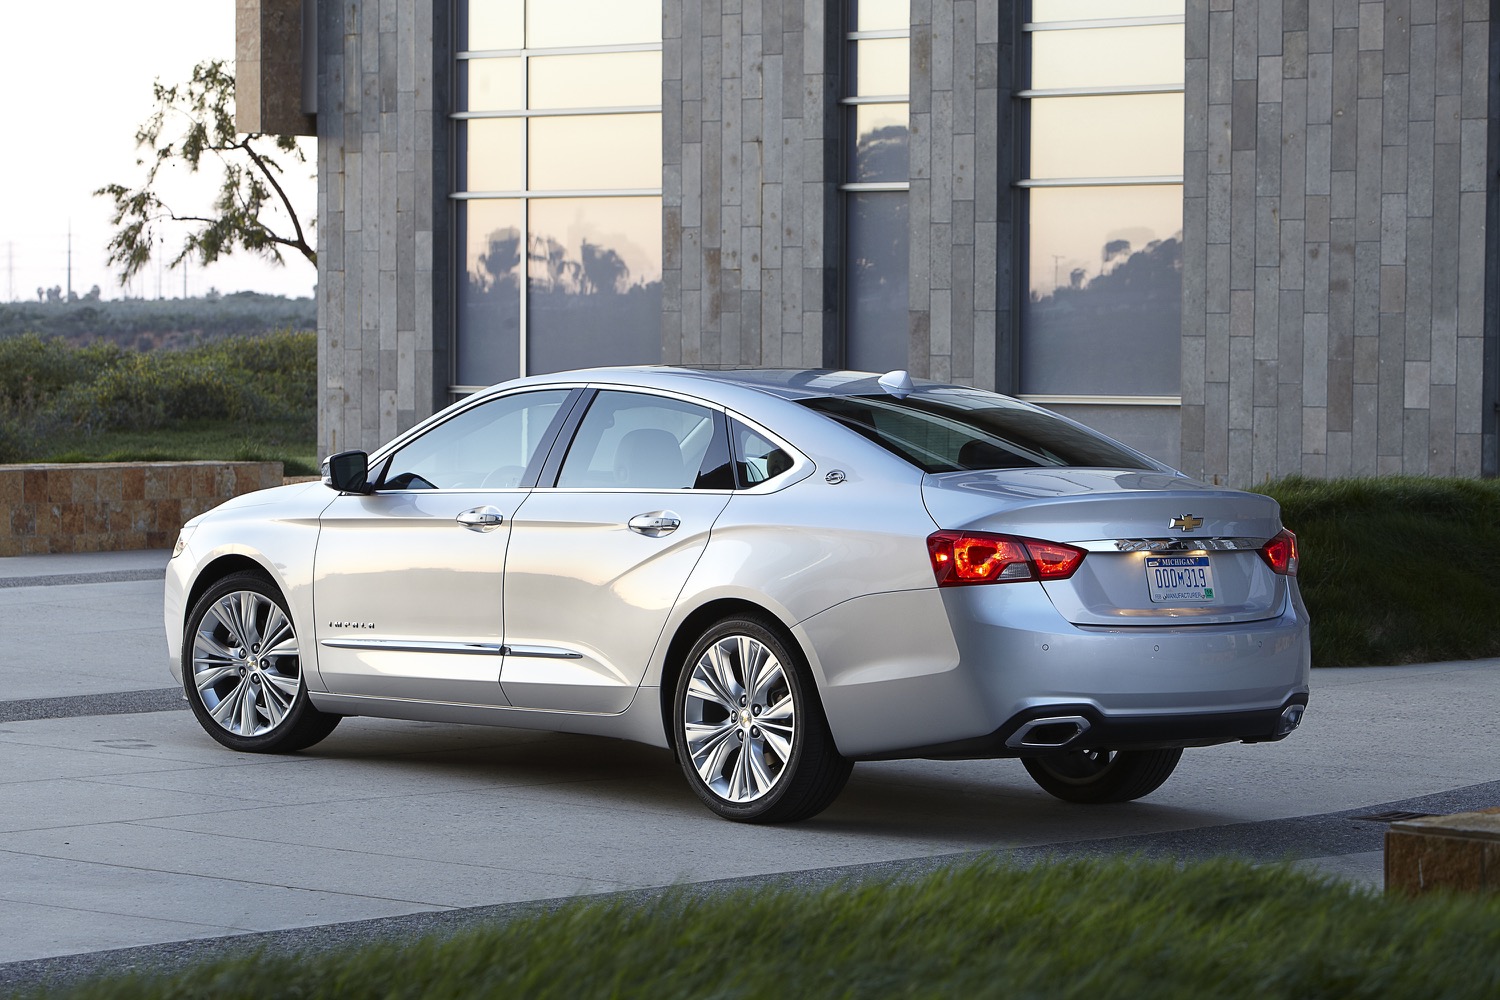 2019 Chevy Impala Gets These Three Changes | GM Authority